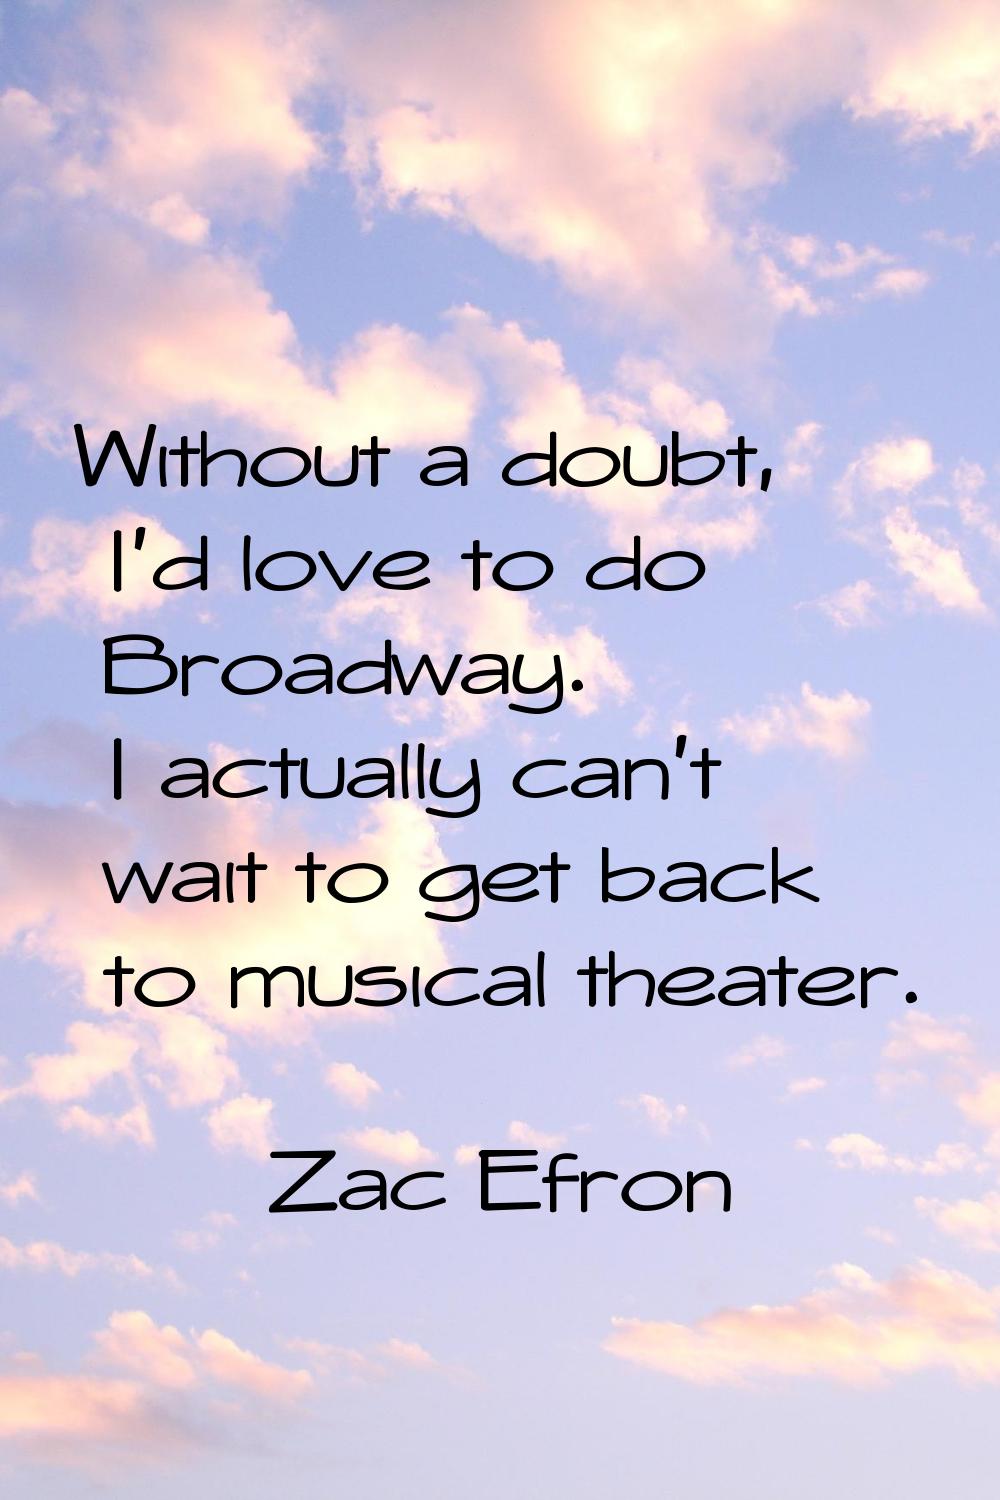 Without a doubt, I'd love to do Broadway. I actually can't wait to get back to musical theater.